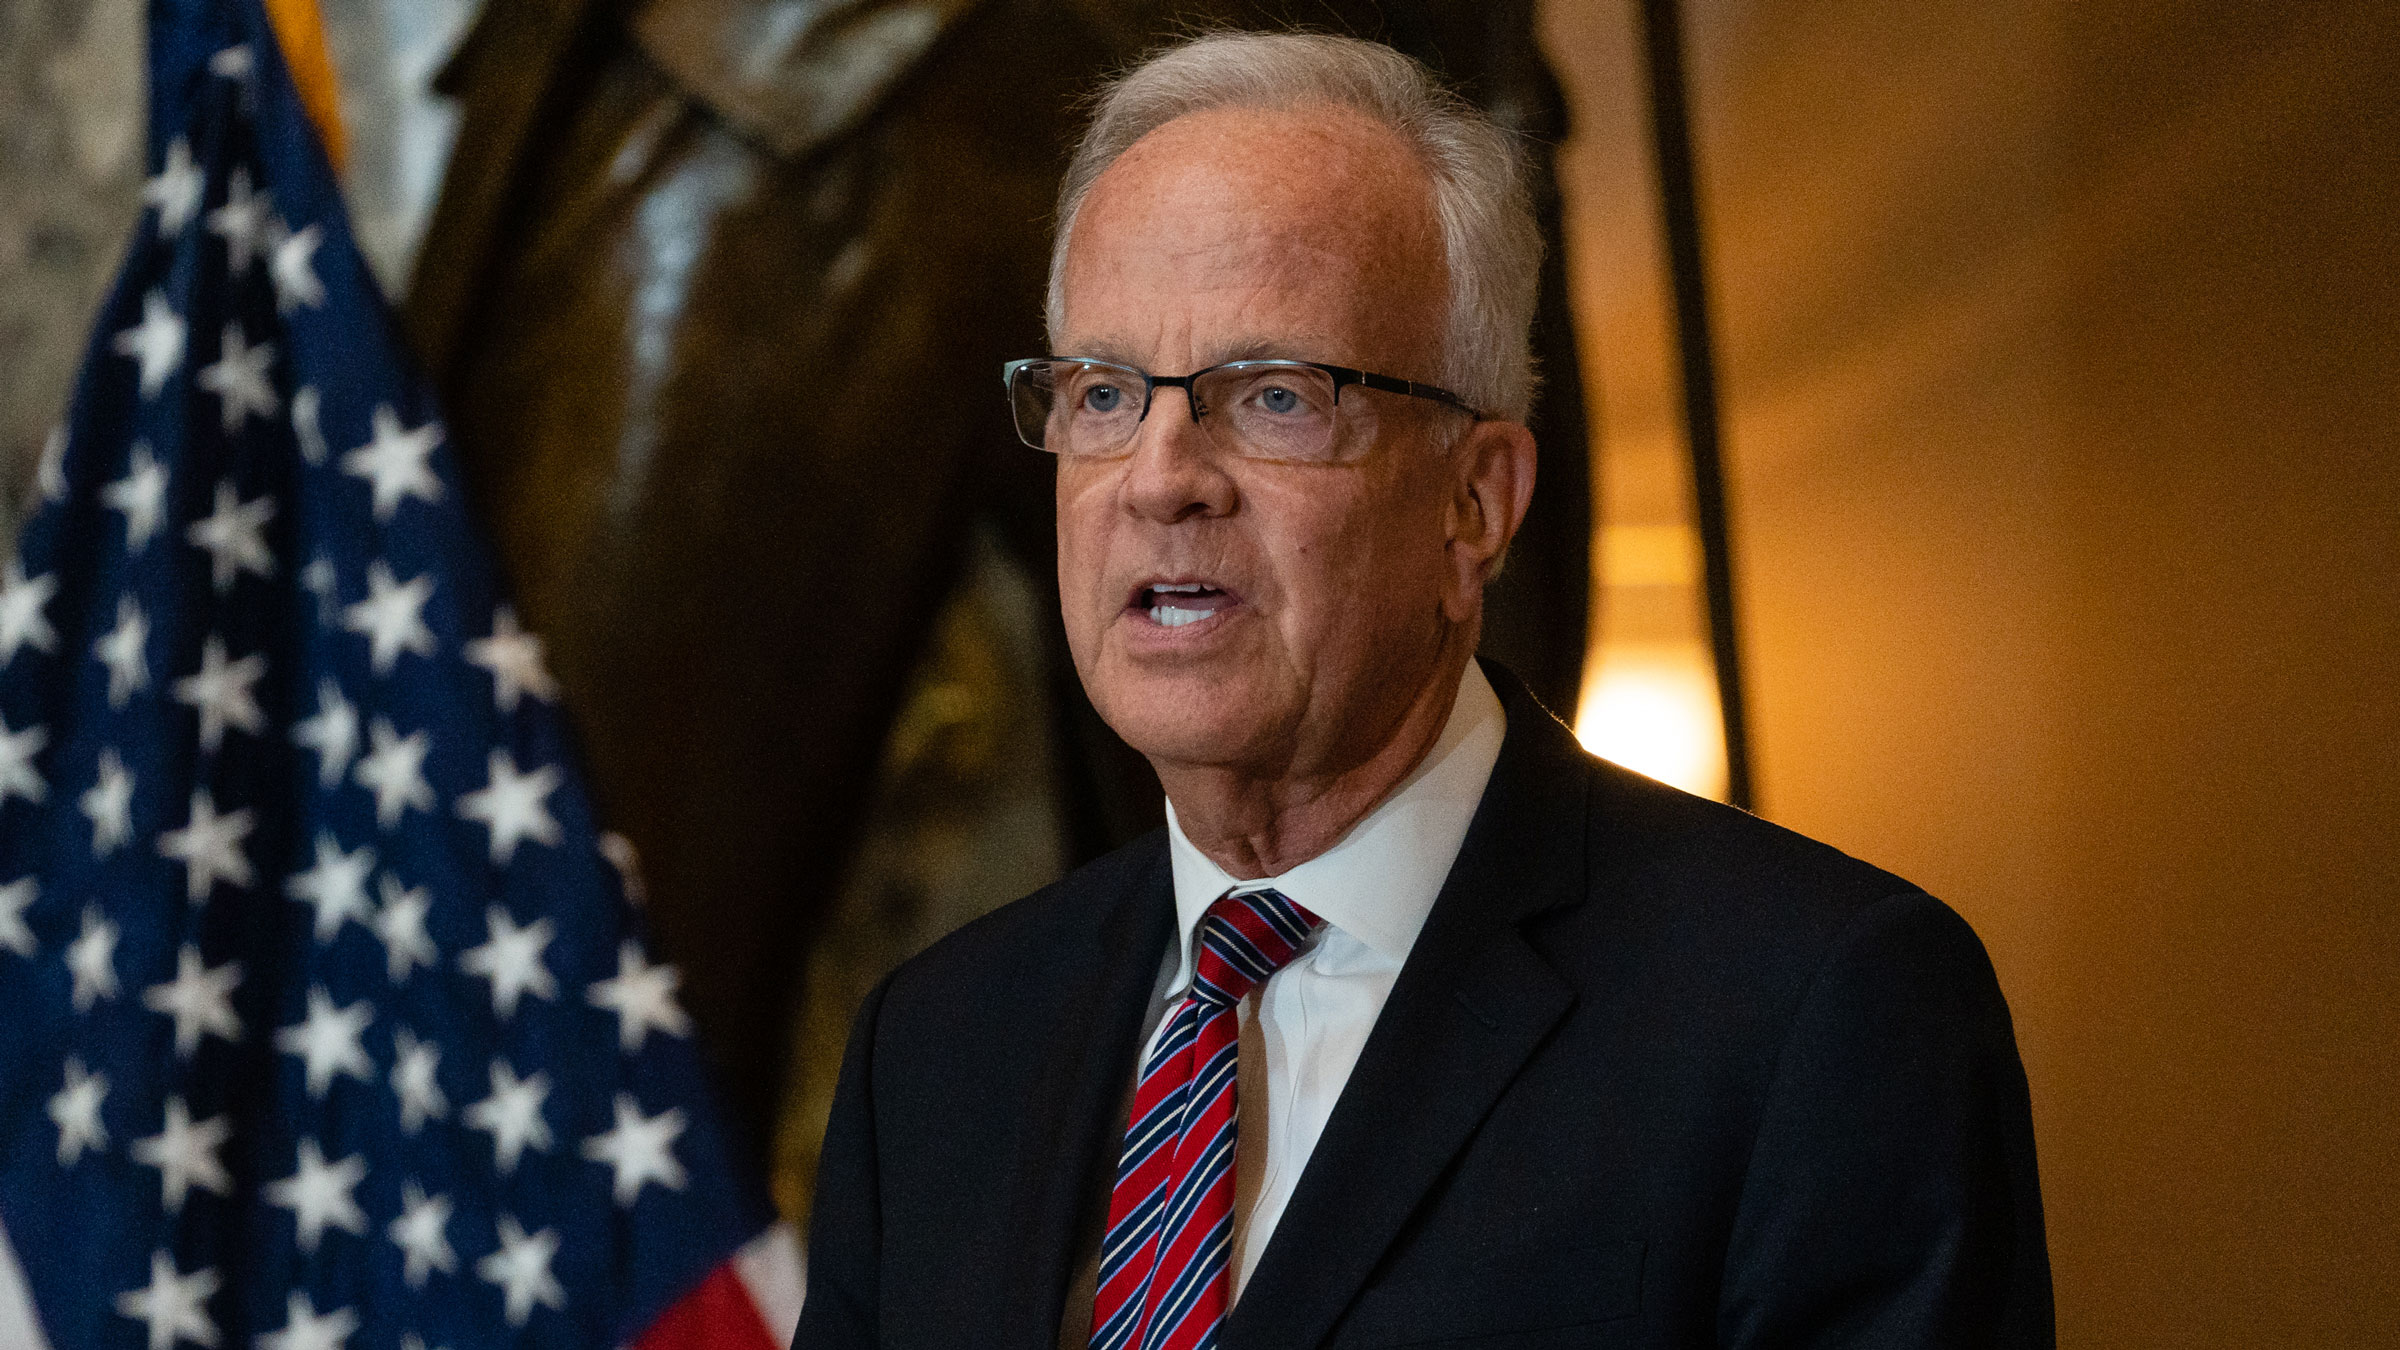 US Sen. Jerry Moran speaks at the US Capitol on Wednesday.